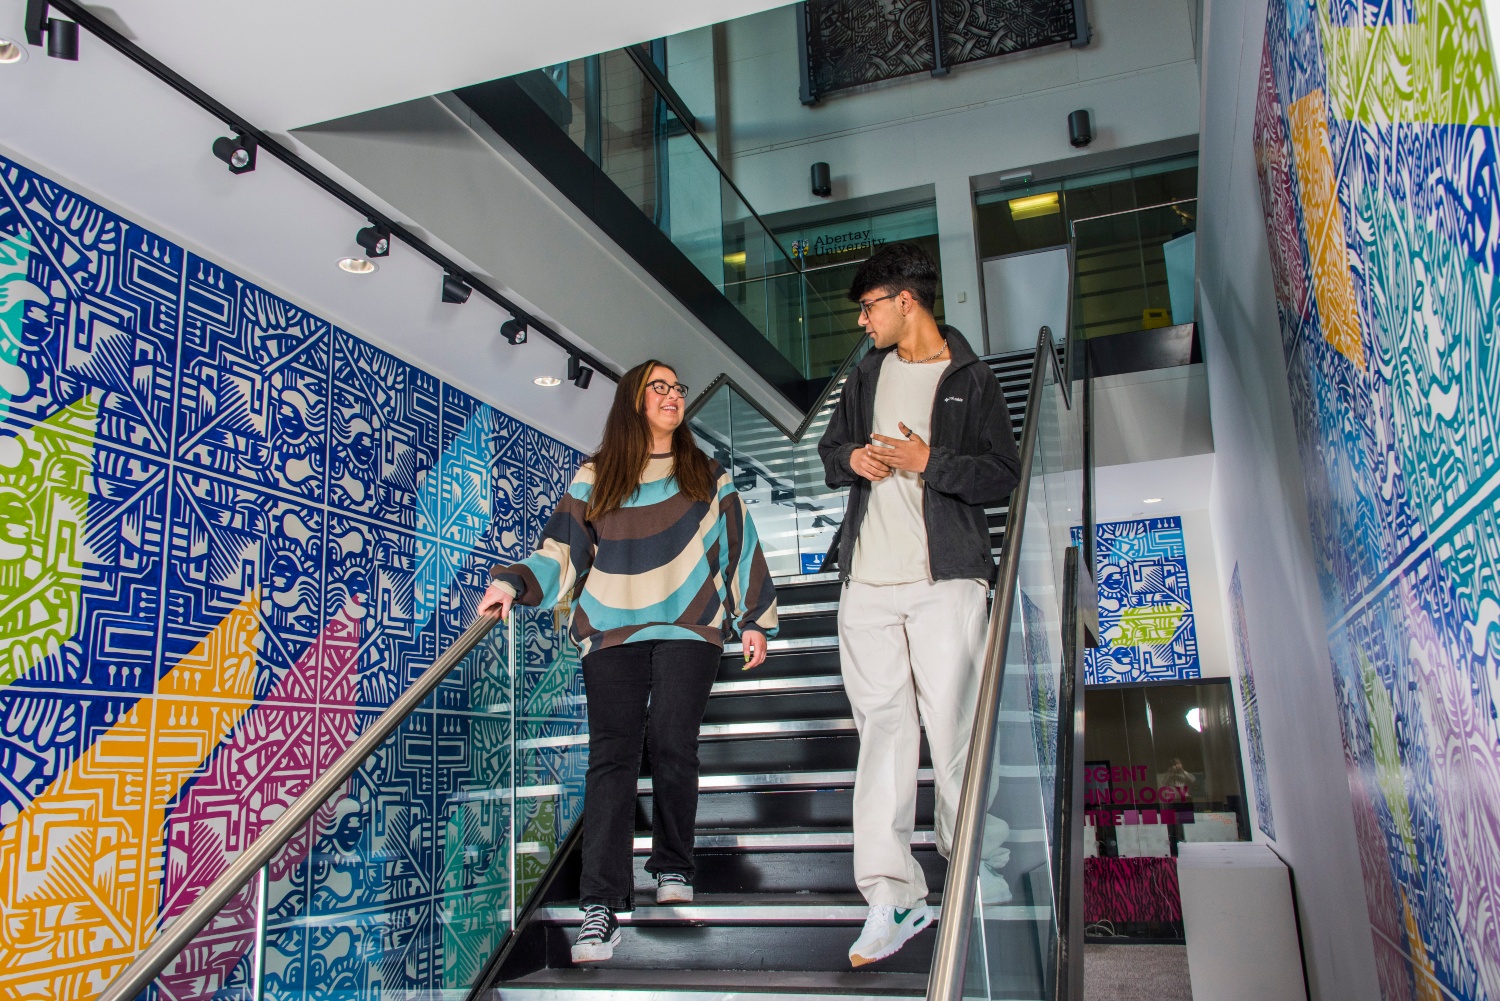 Two students chatting and descending the stairs at Abertay 